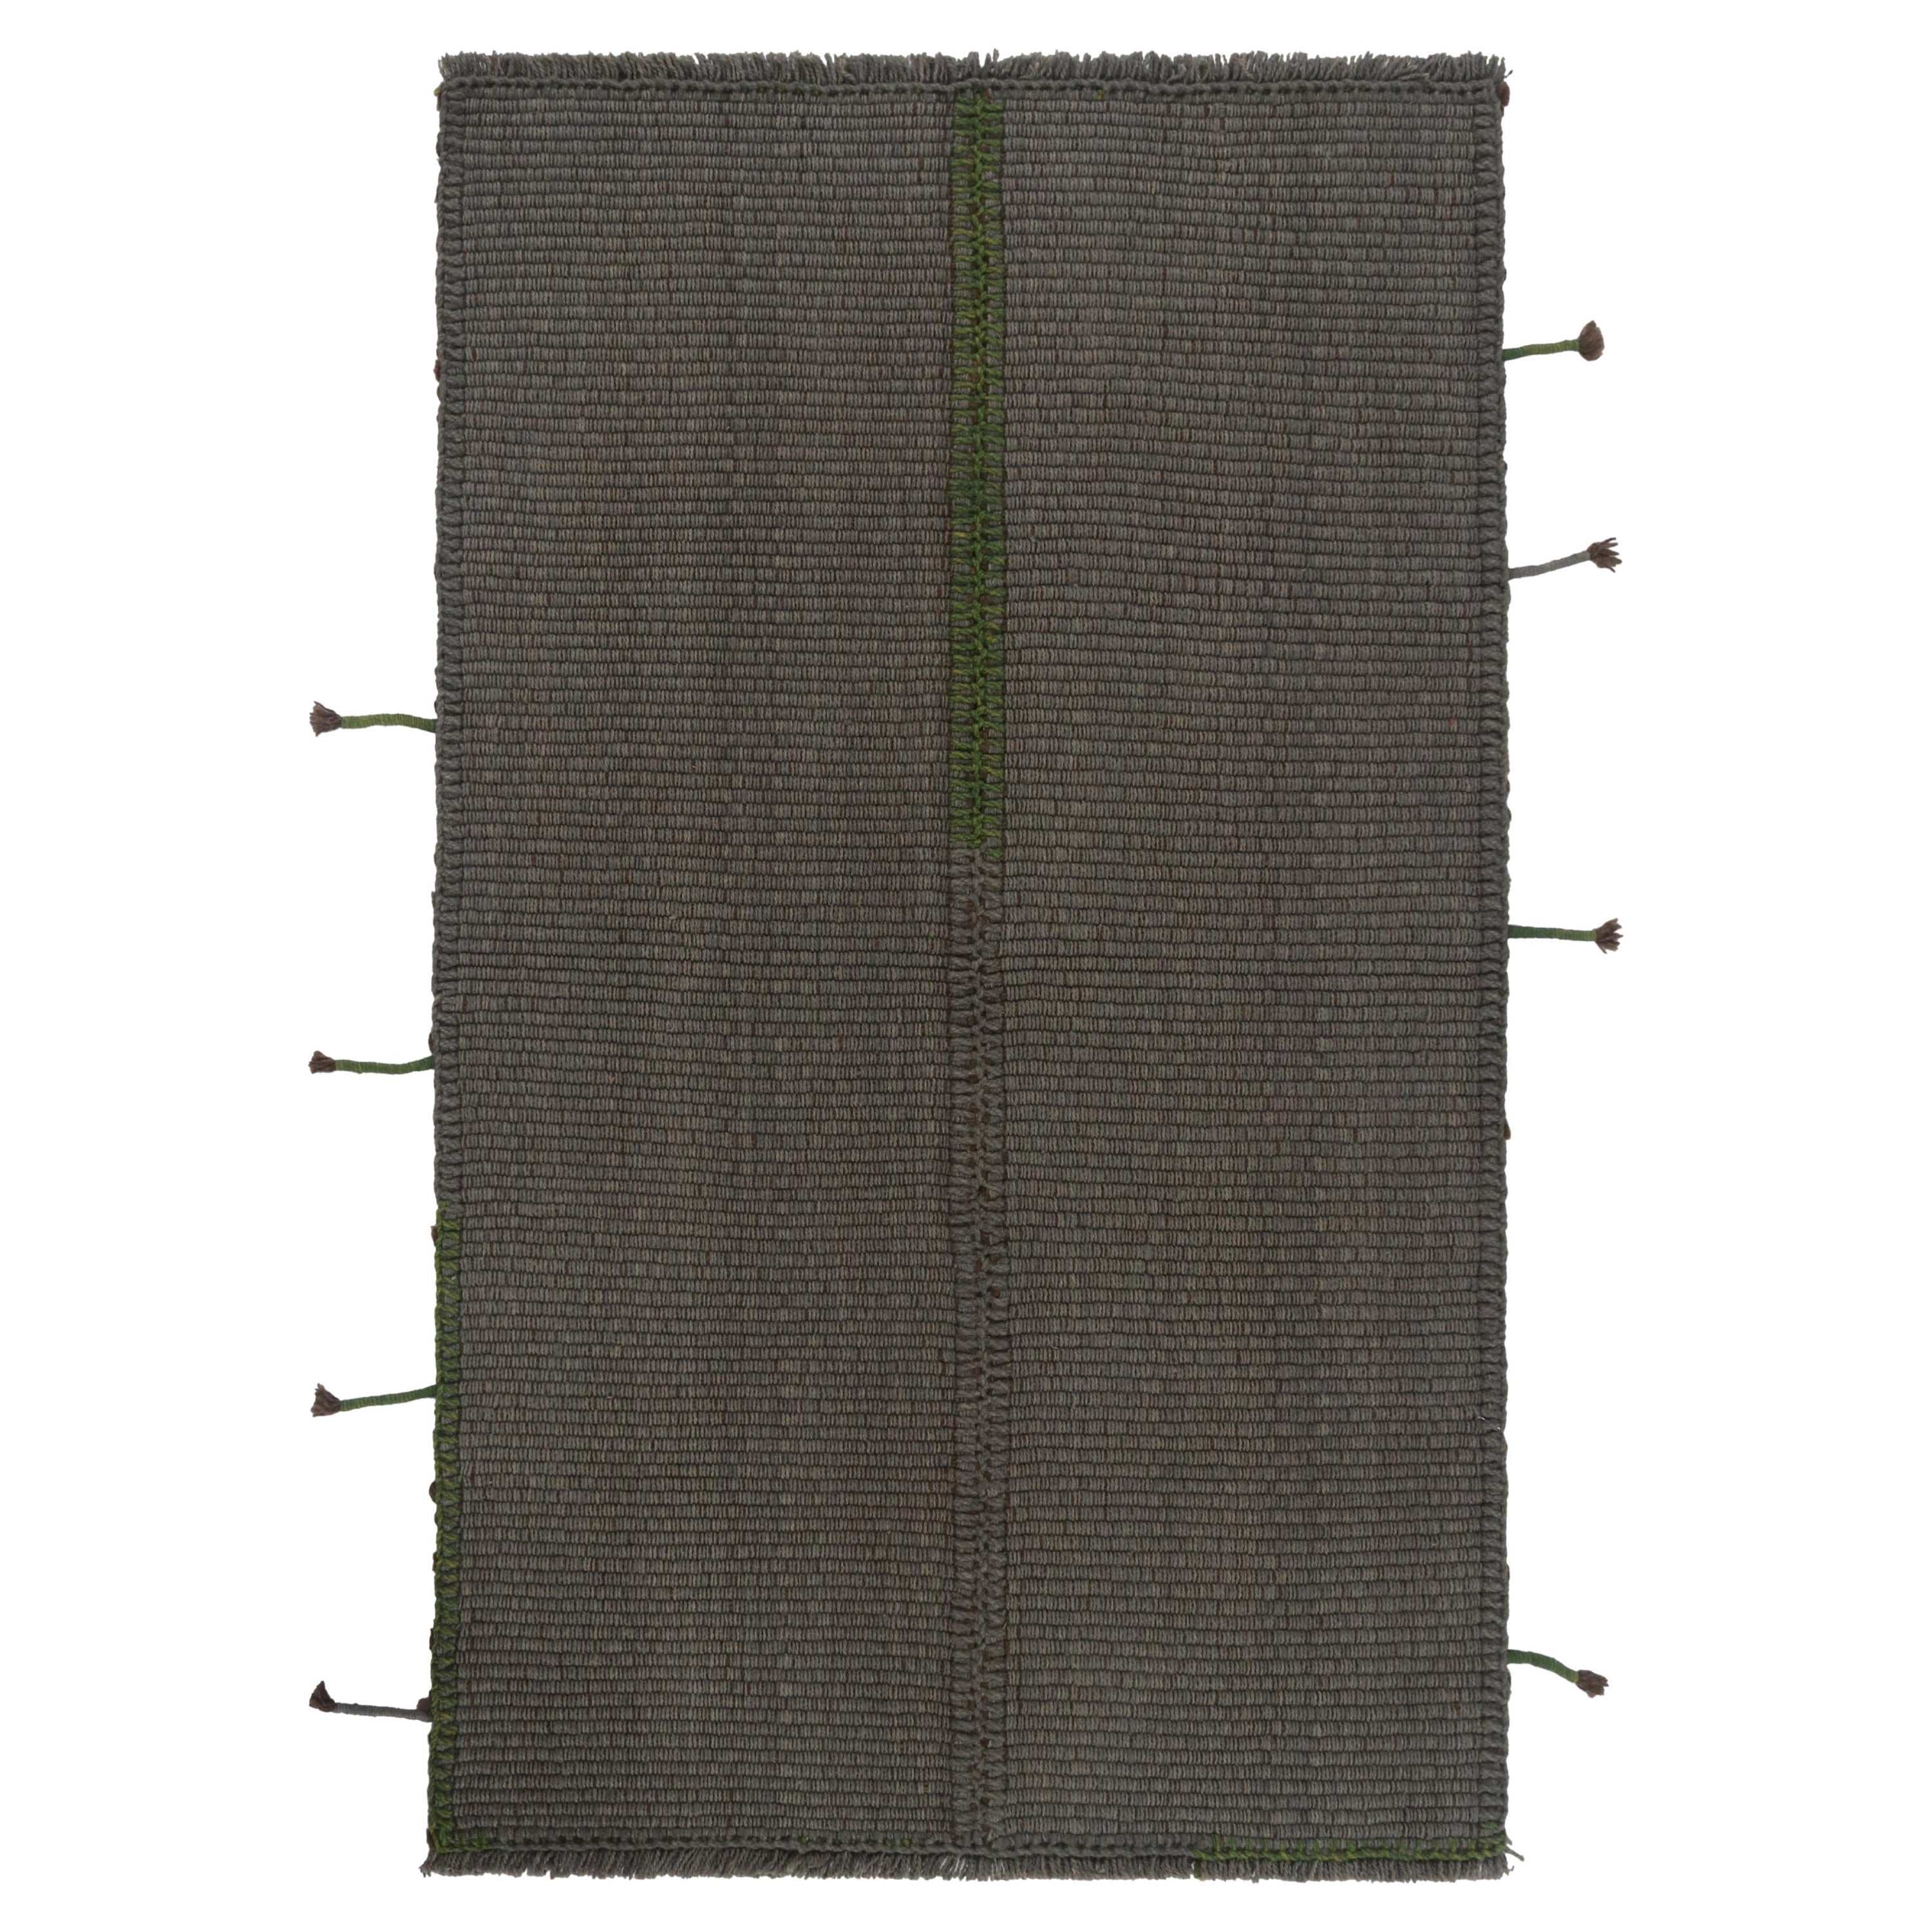 Rug & Kilim’s Contemporary Kilim in Gray with Green and Brown Accents